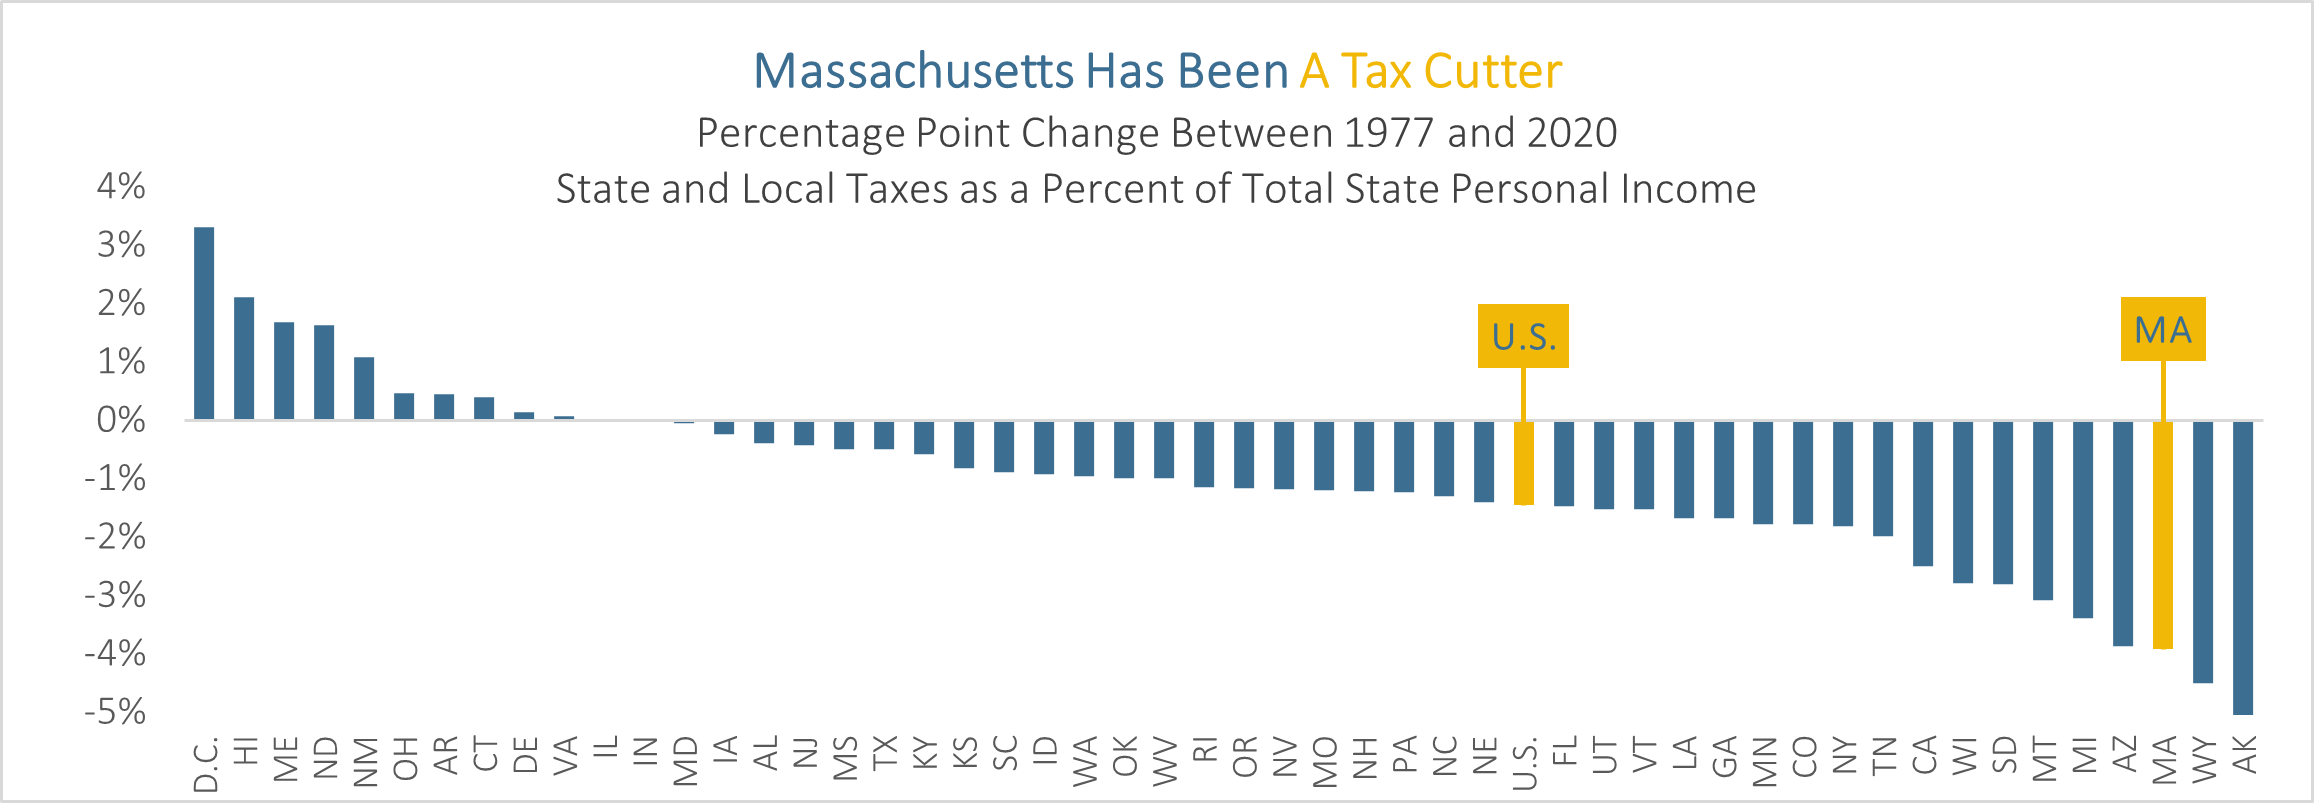 Massachusetts has been a tax cutter - Percentage point change between 1977 and 2020, state and local taxes as a percent of total state personal income. MA is about -3.9% compared to the U.S. average of about -1.5%